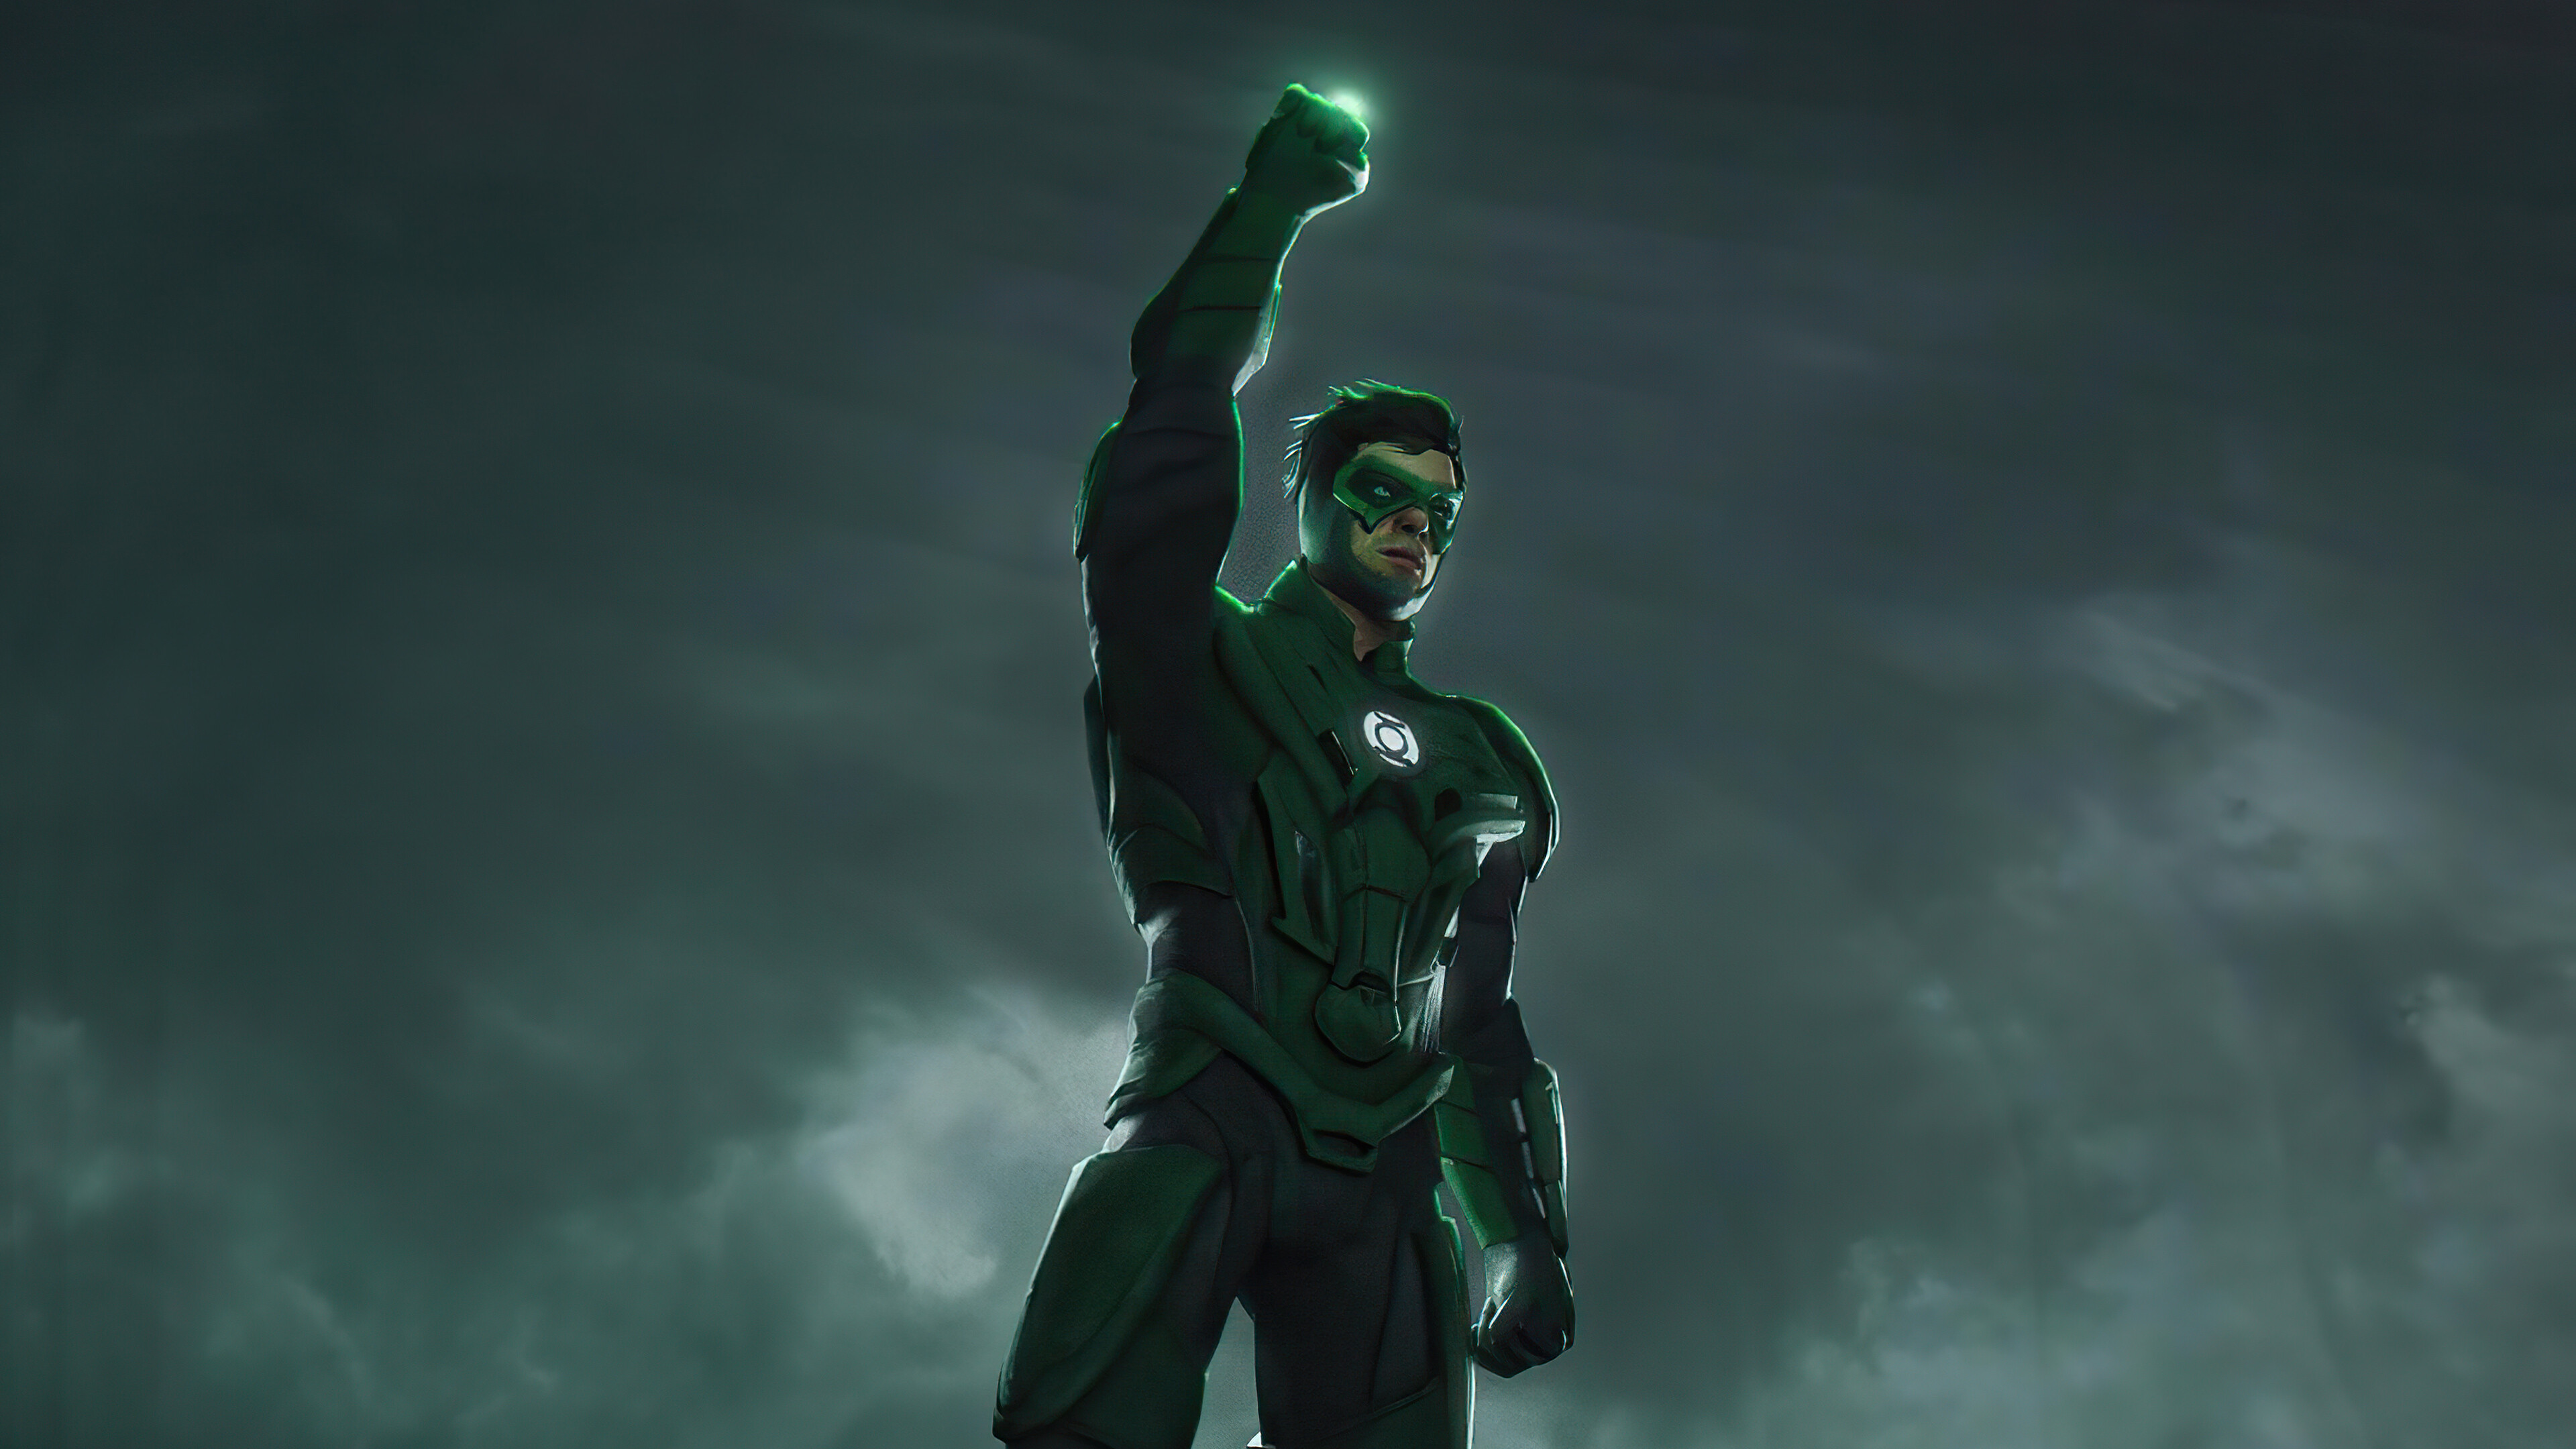 Green Lantern: A superhero appearing in American comic books published by DC Comics. 3840x2160 4K Background.